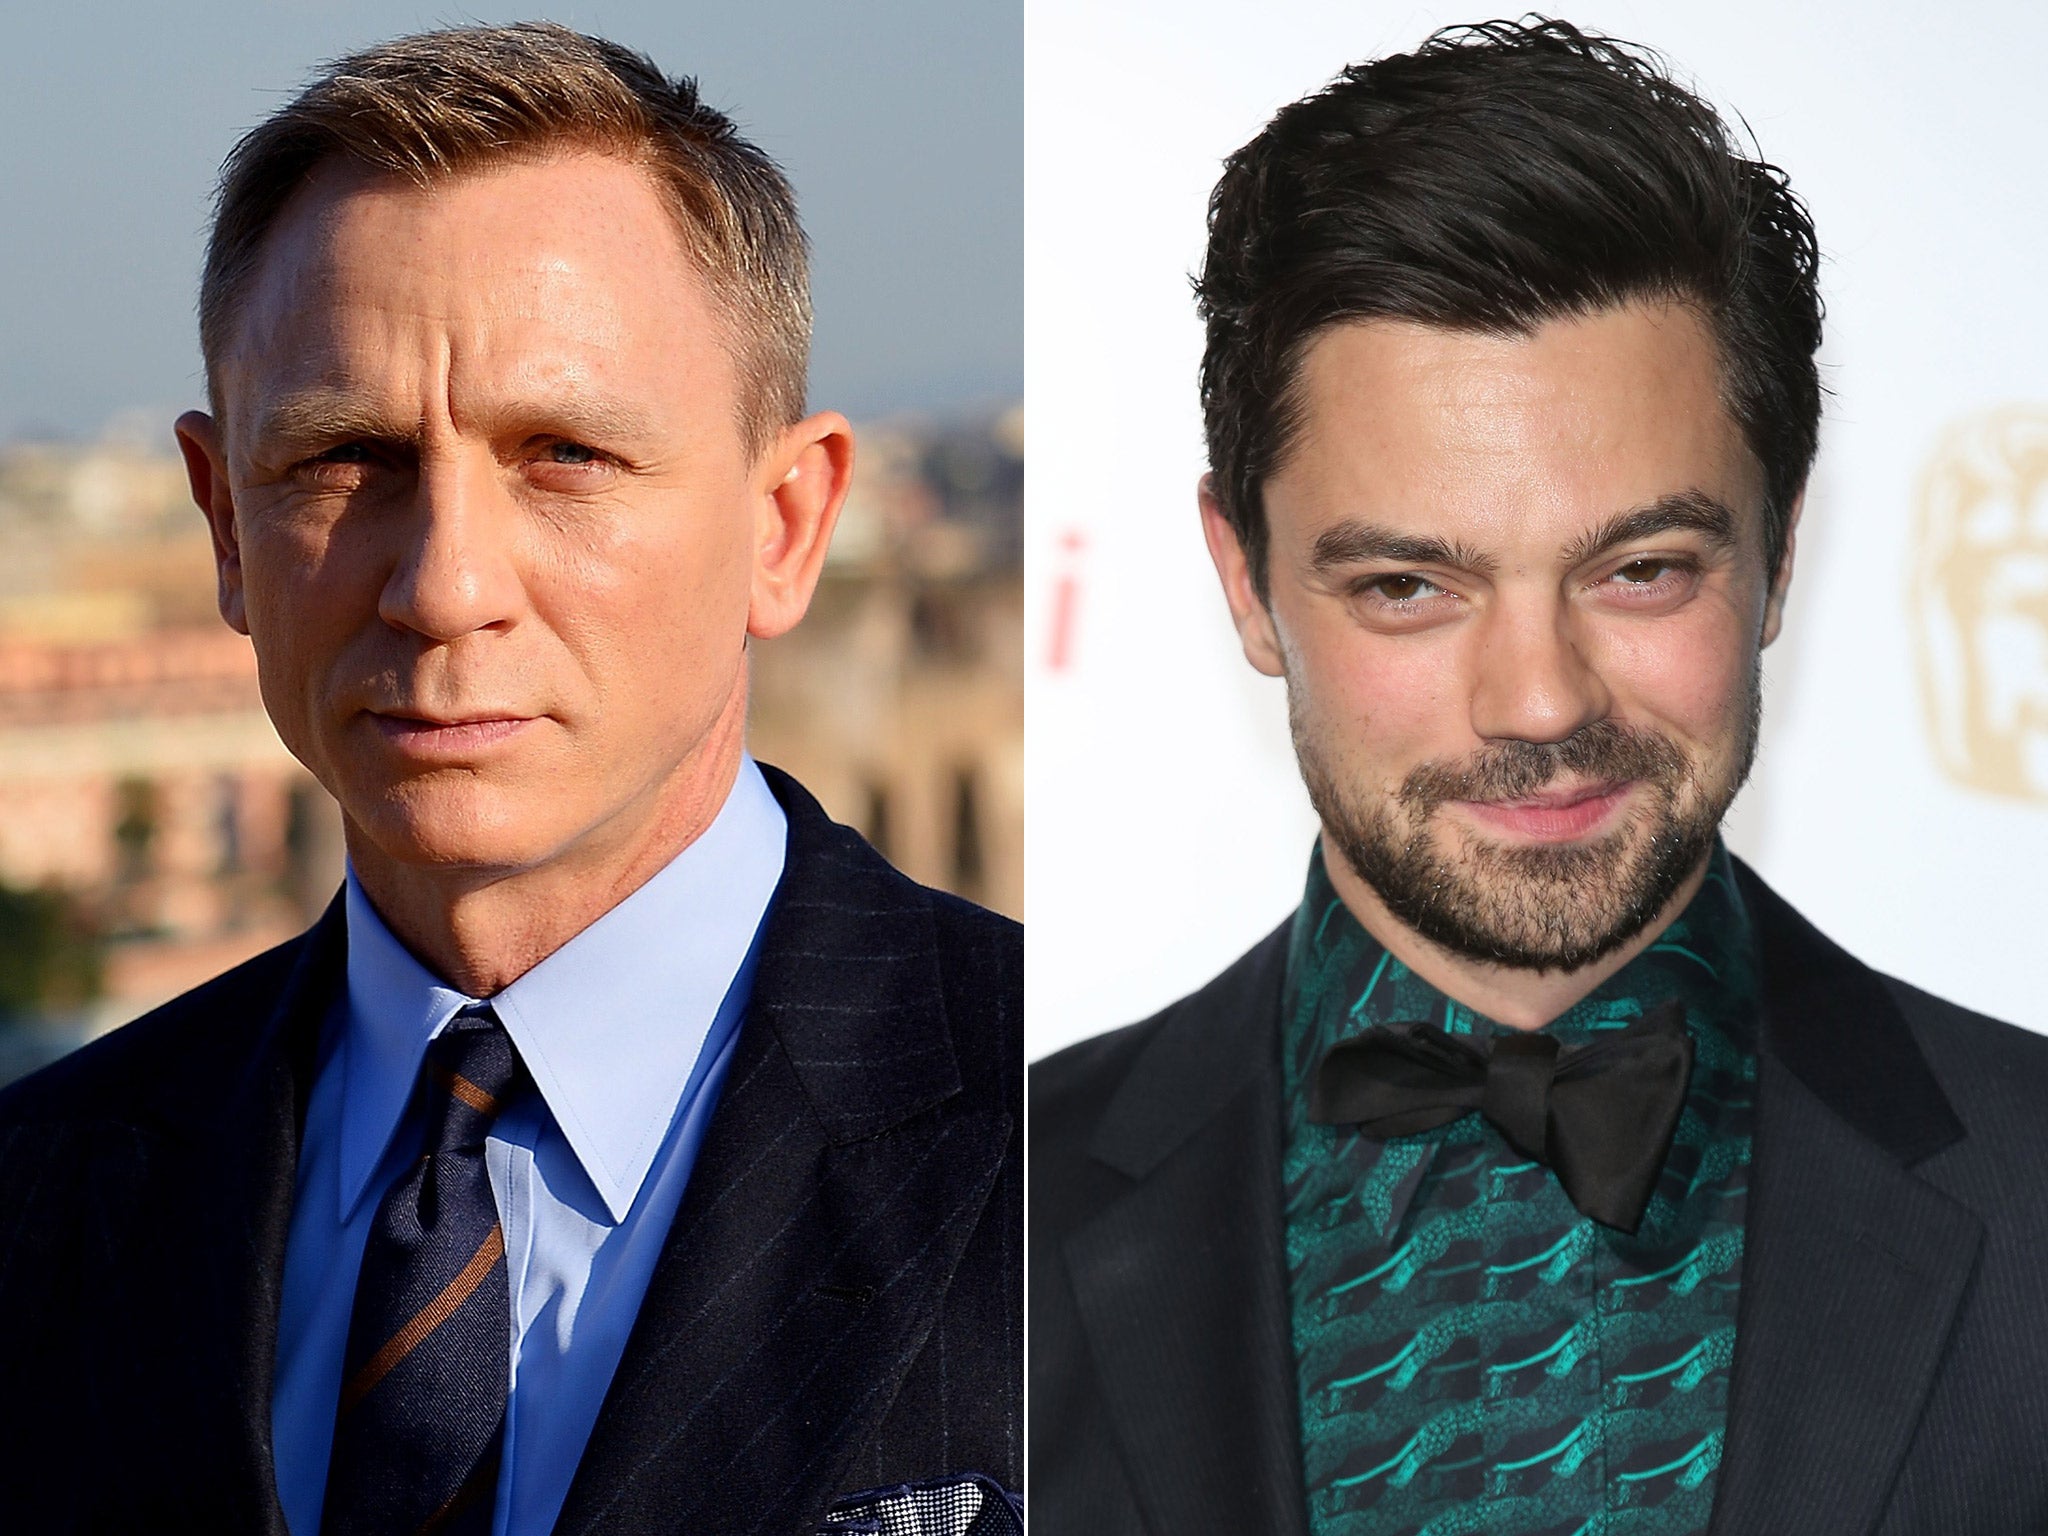 Daniel Craig and Dominic Cooper could star in a Hollywood version of the story, director Sam Forsdike playfully suggests (Getty)